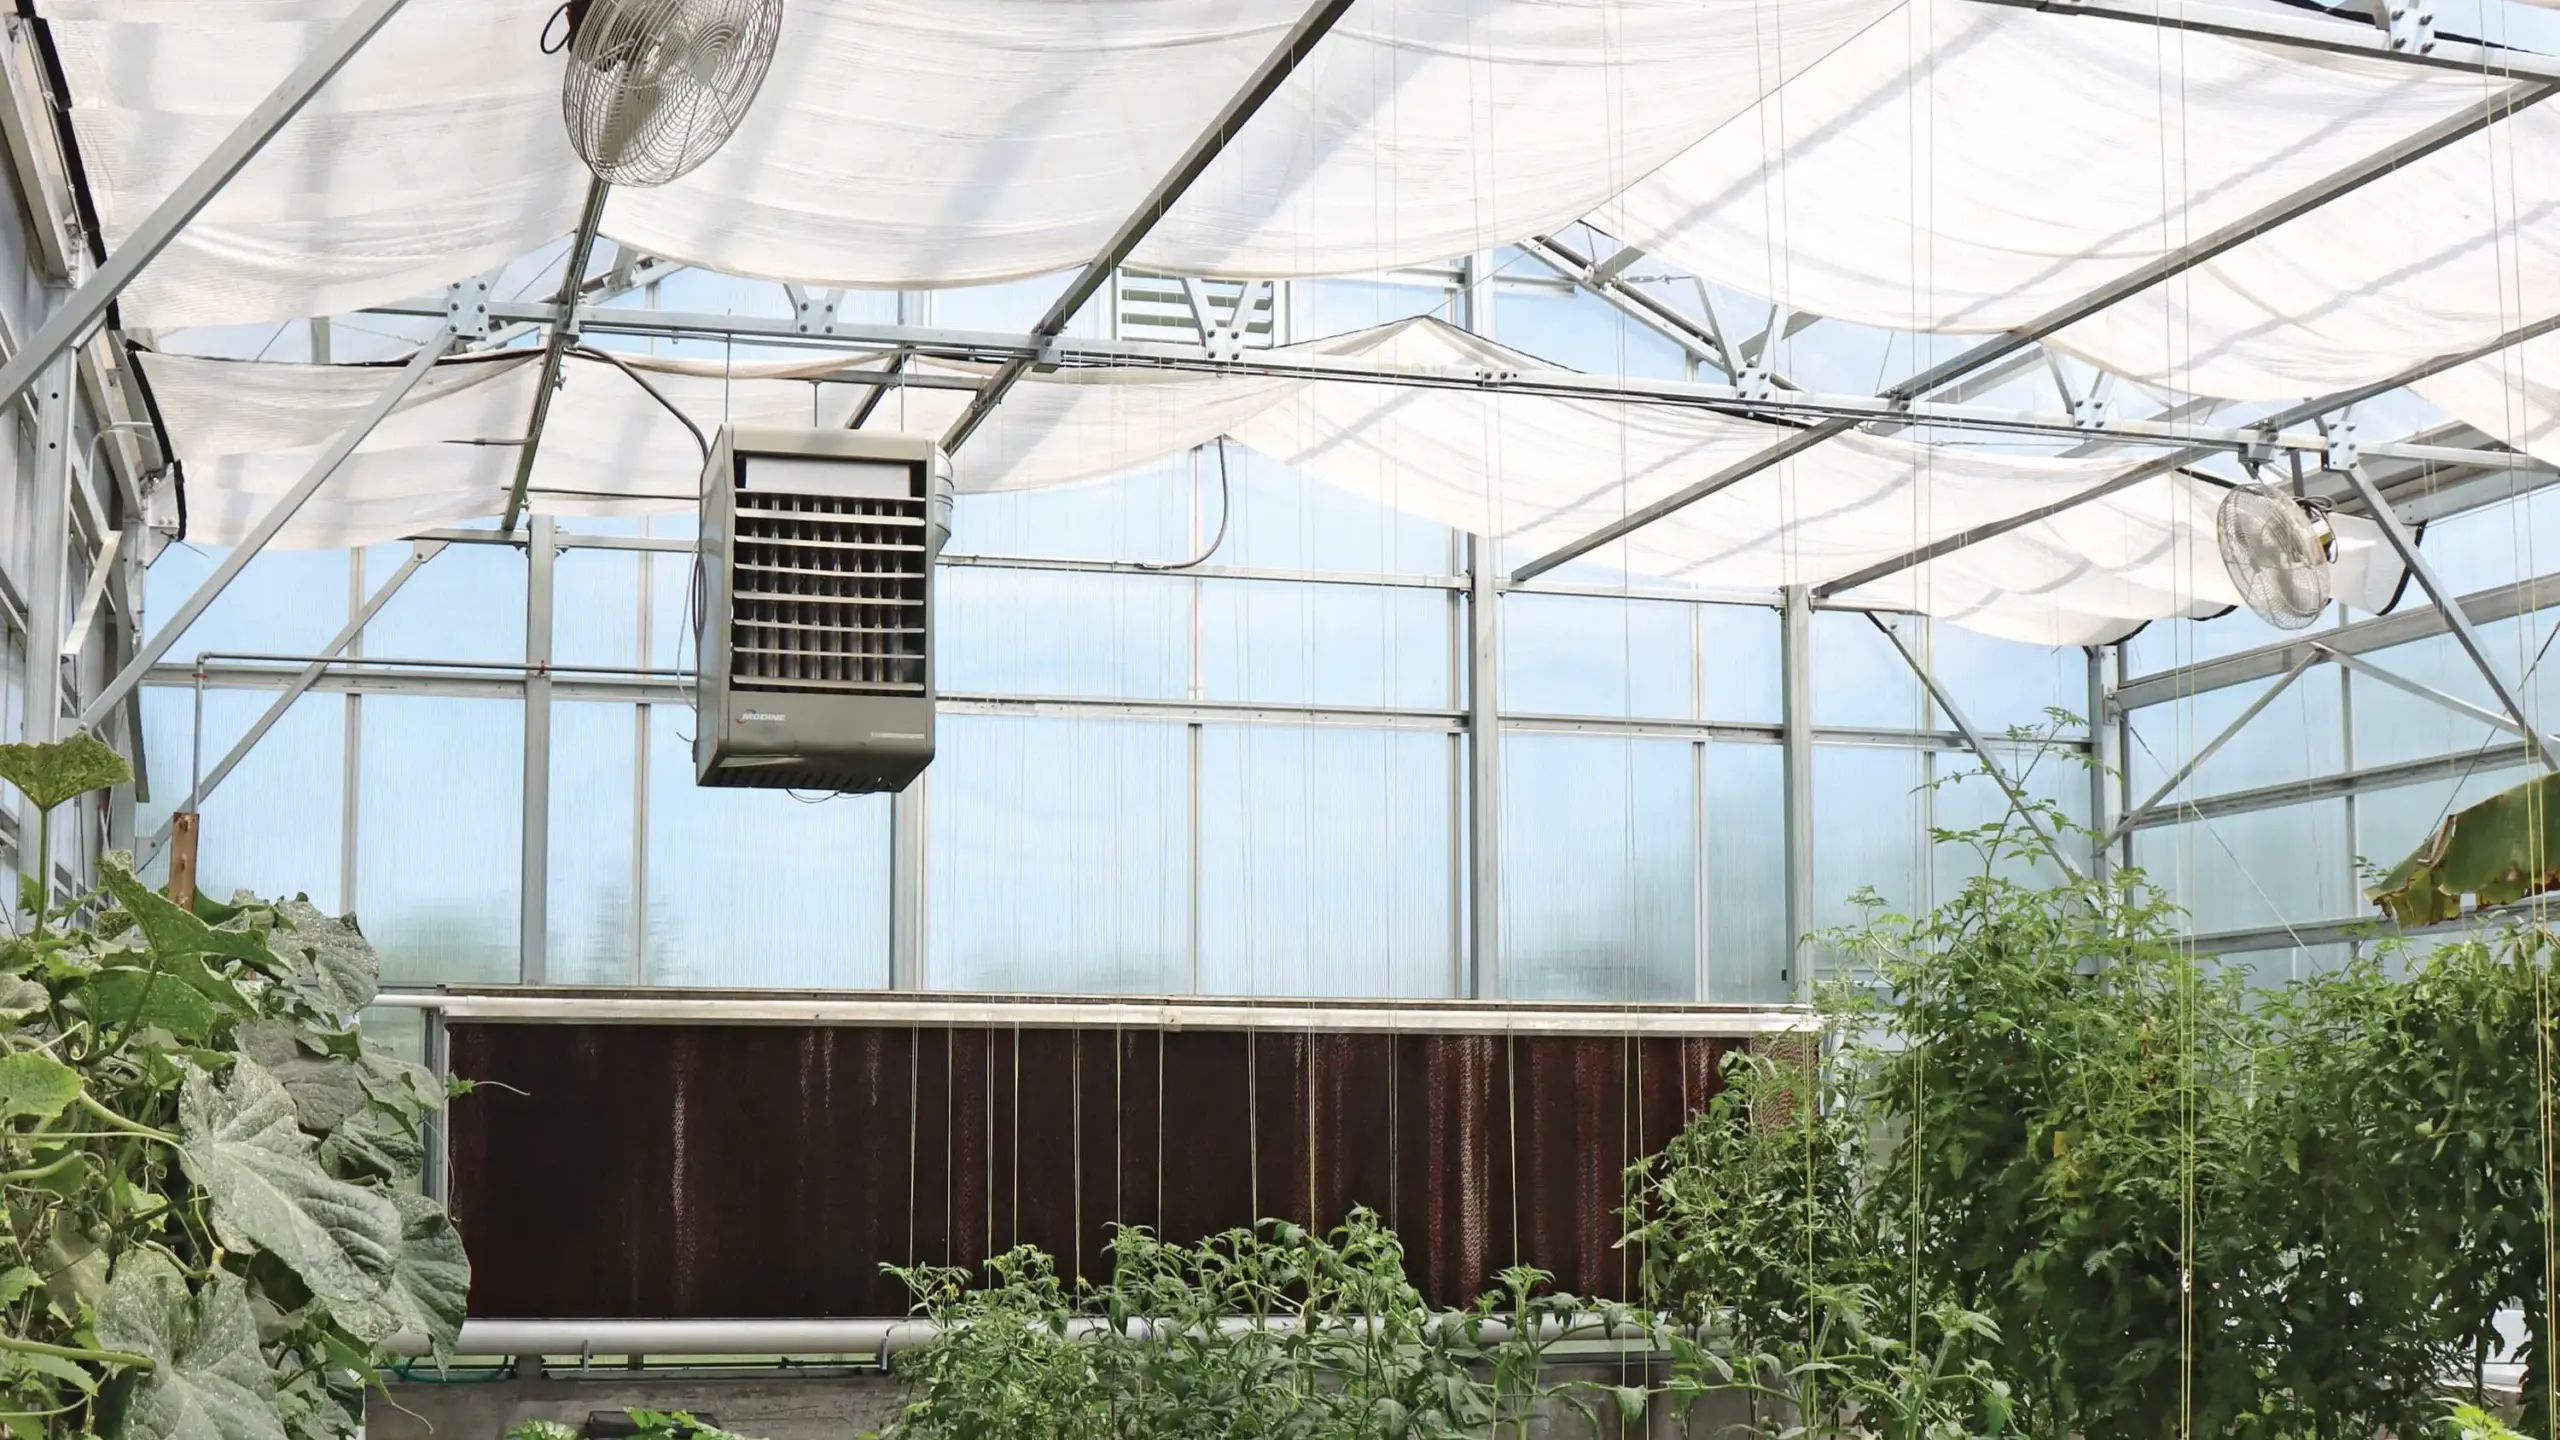 commercial greenhouse supplies in use: forced air heater, circulation fans, evaporative cooling system